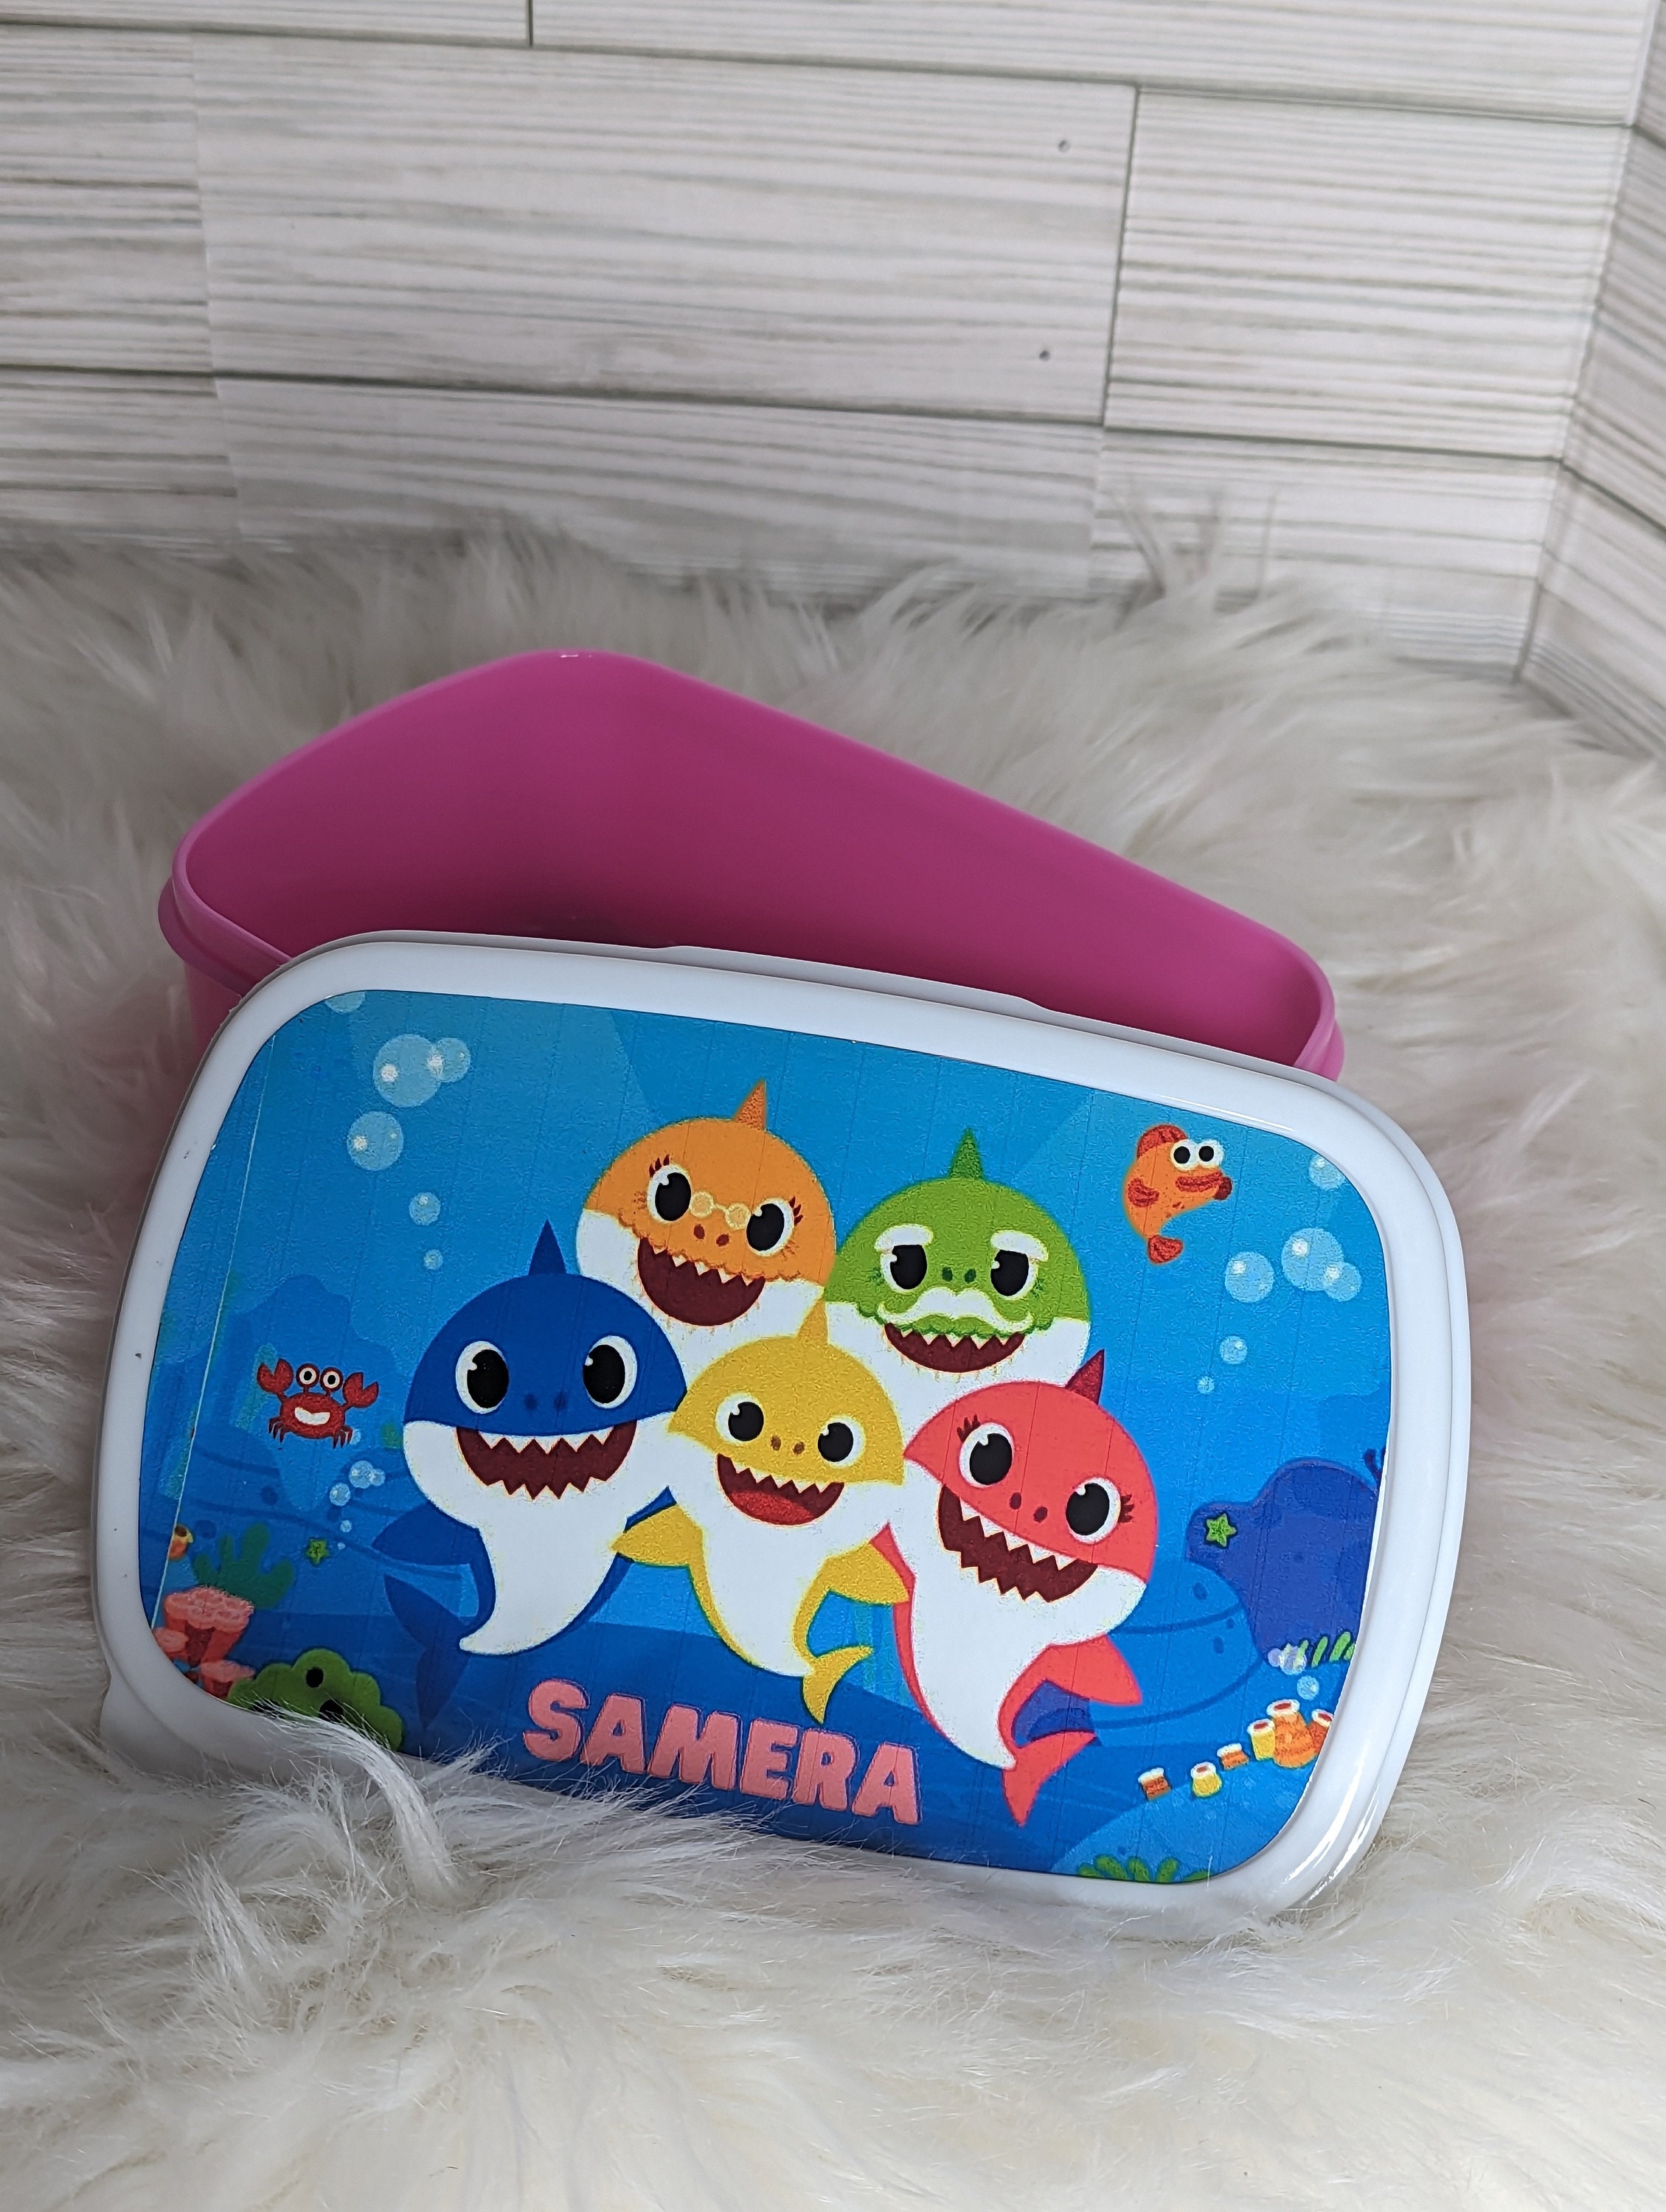 Baby Shark Lunch Box Kit for Kids Includes Plastic Snacks Storage and  Sandwich Container BPA-Free, Dishwasher Safe Toddler-Friendly Lunch  Containers